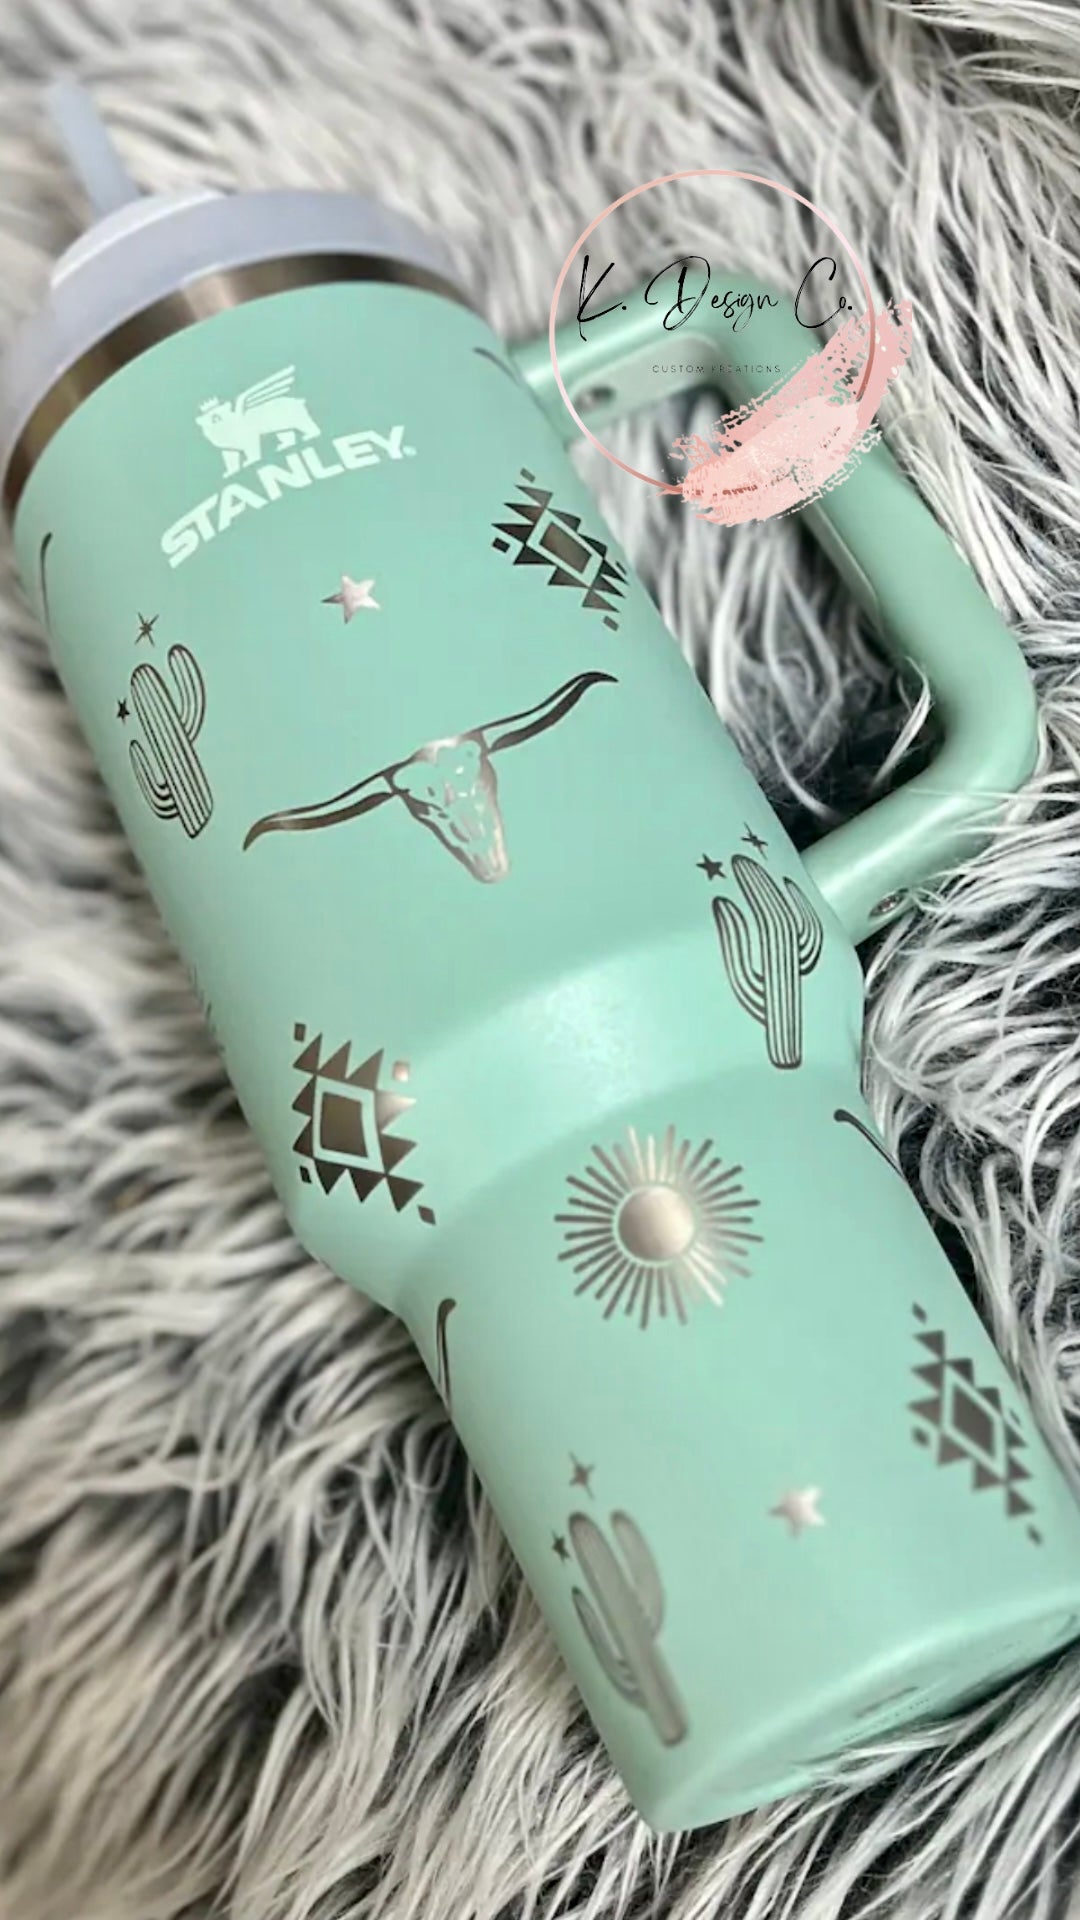 Stanley 40oz Tumbler, Leopard Tumbler, Mama Stanley, Mother's Day